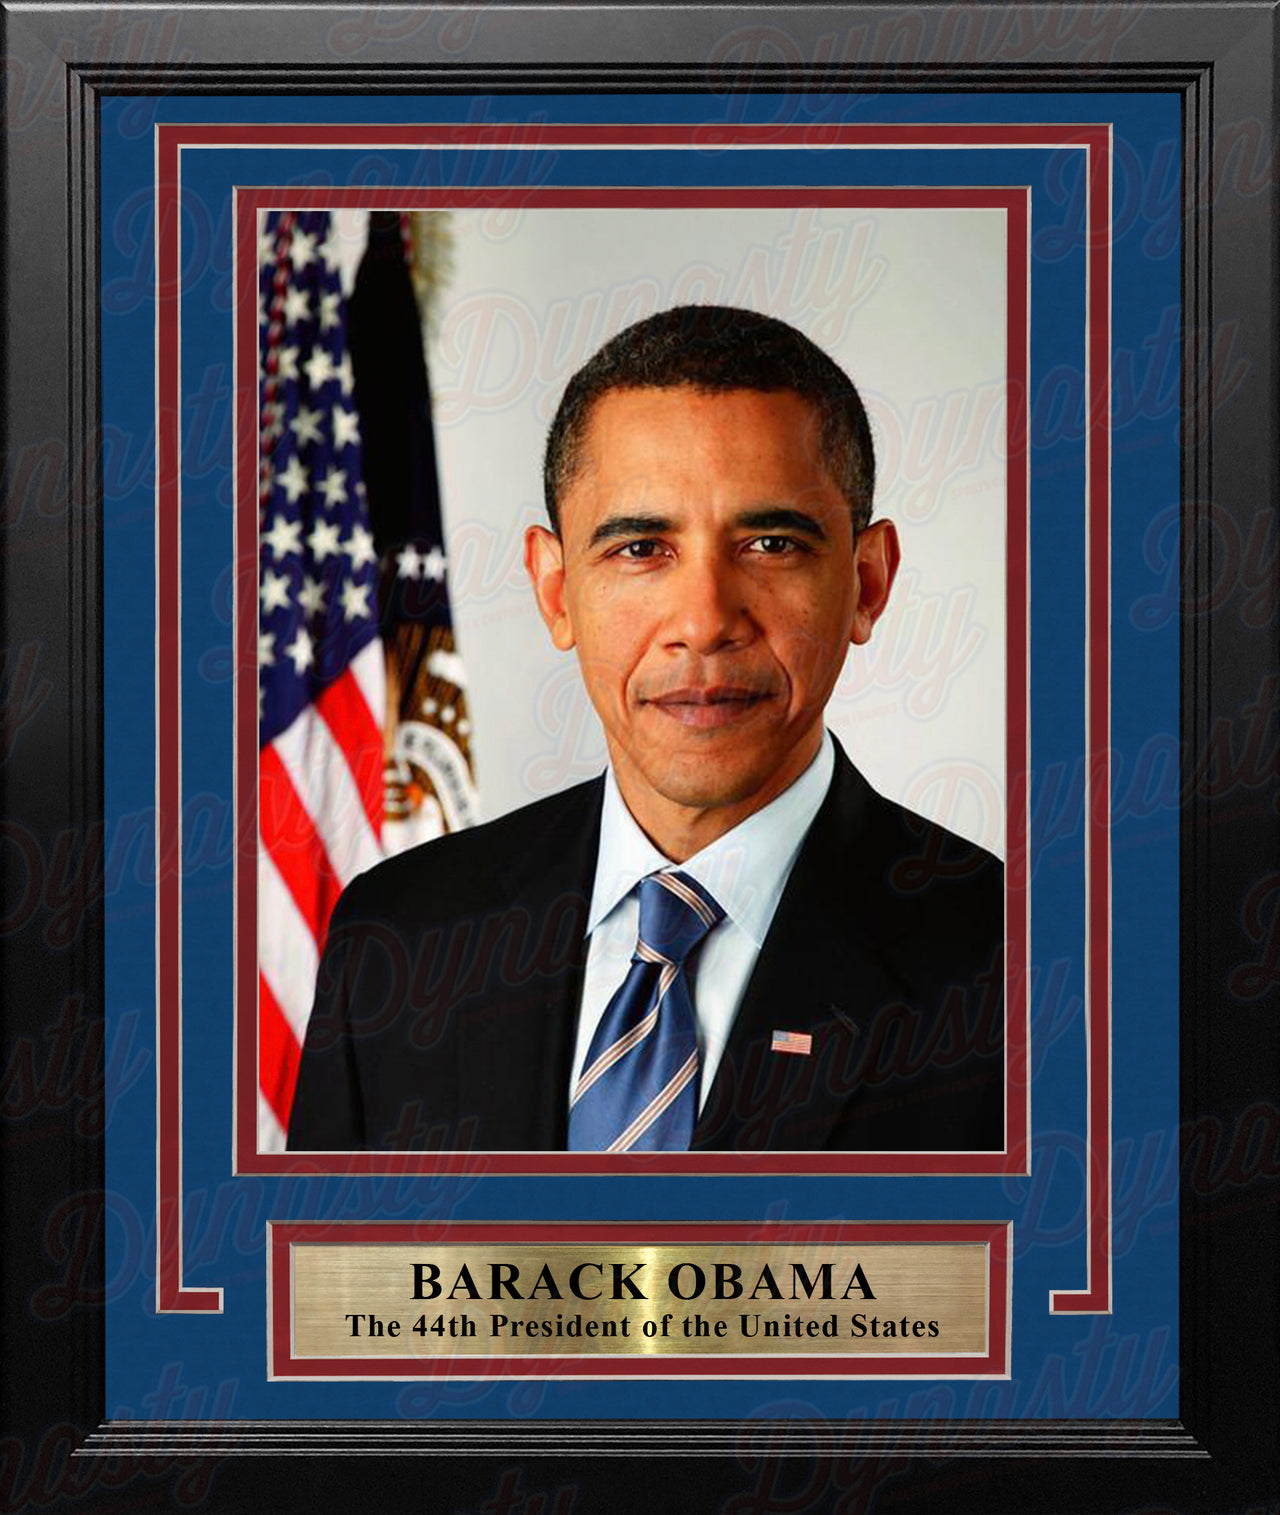 Barack Obama 44th President of the United States 8" x 10" Framed and Matted Photo - Dynasty Sports & Framing 